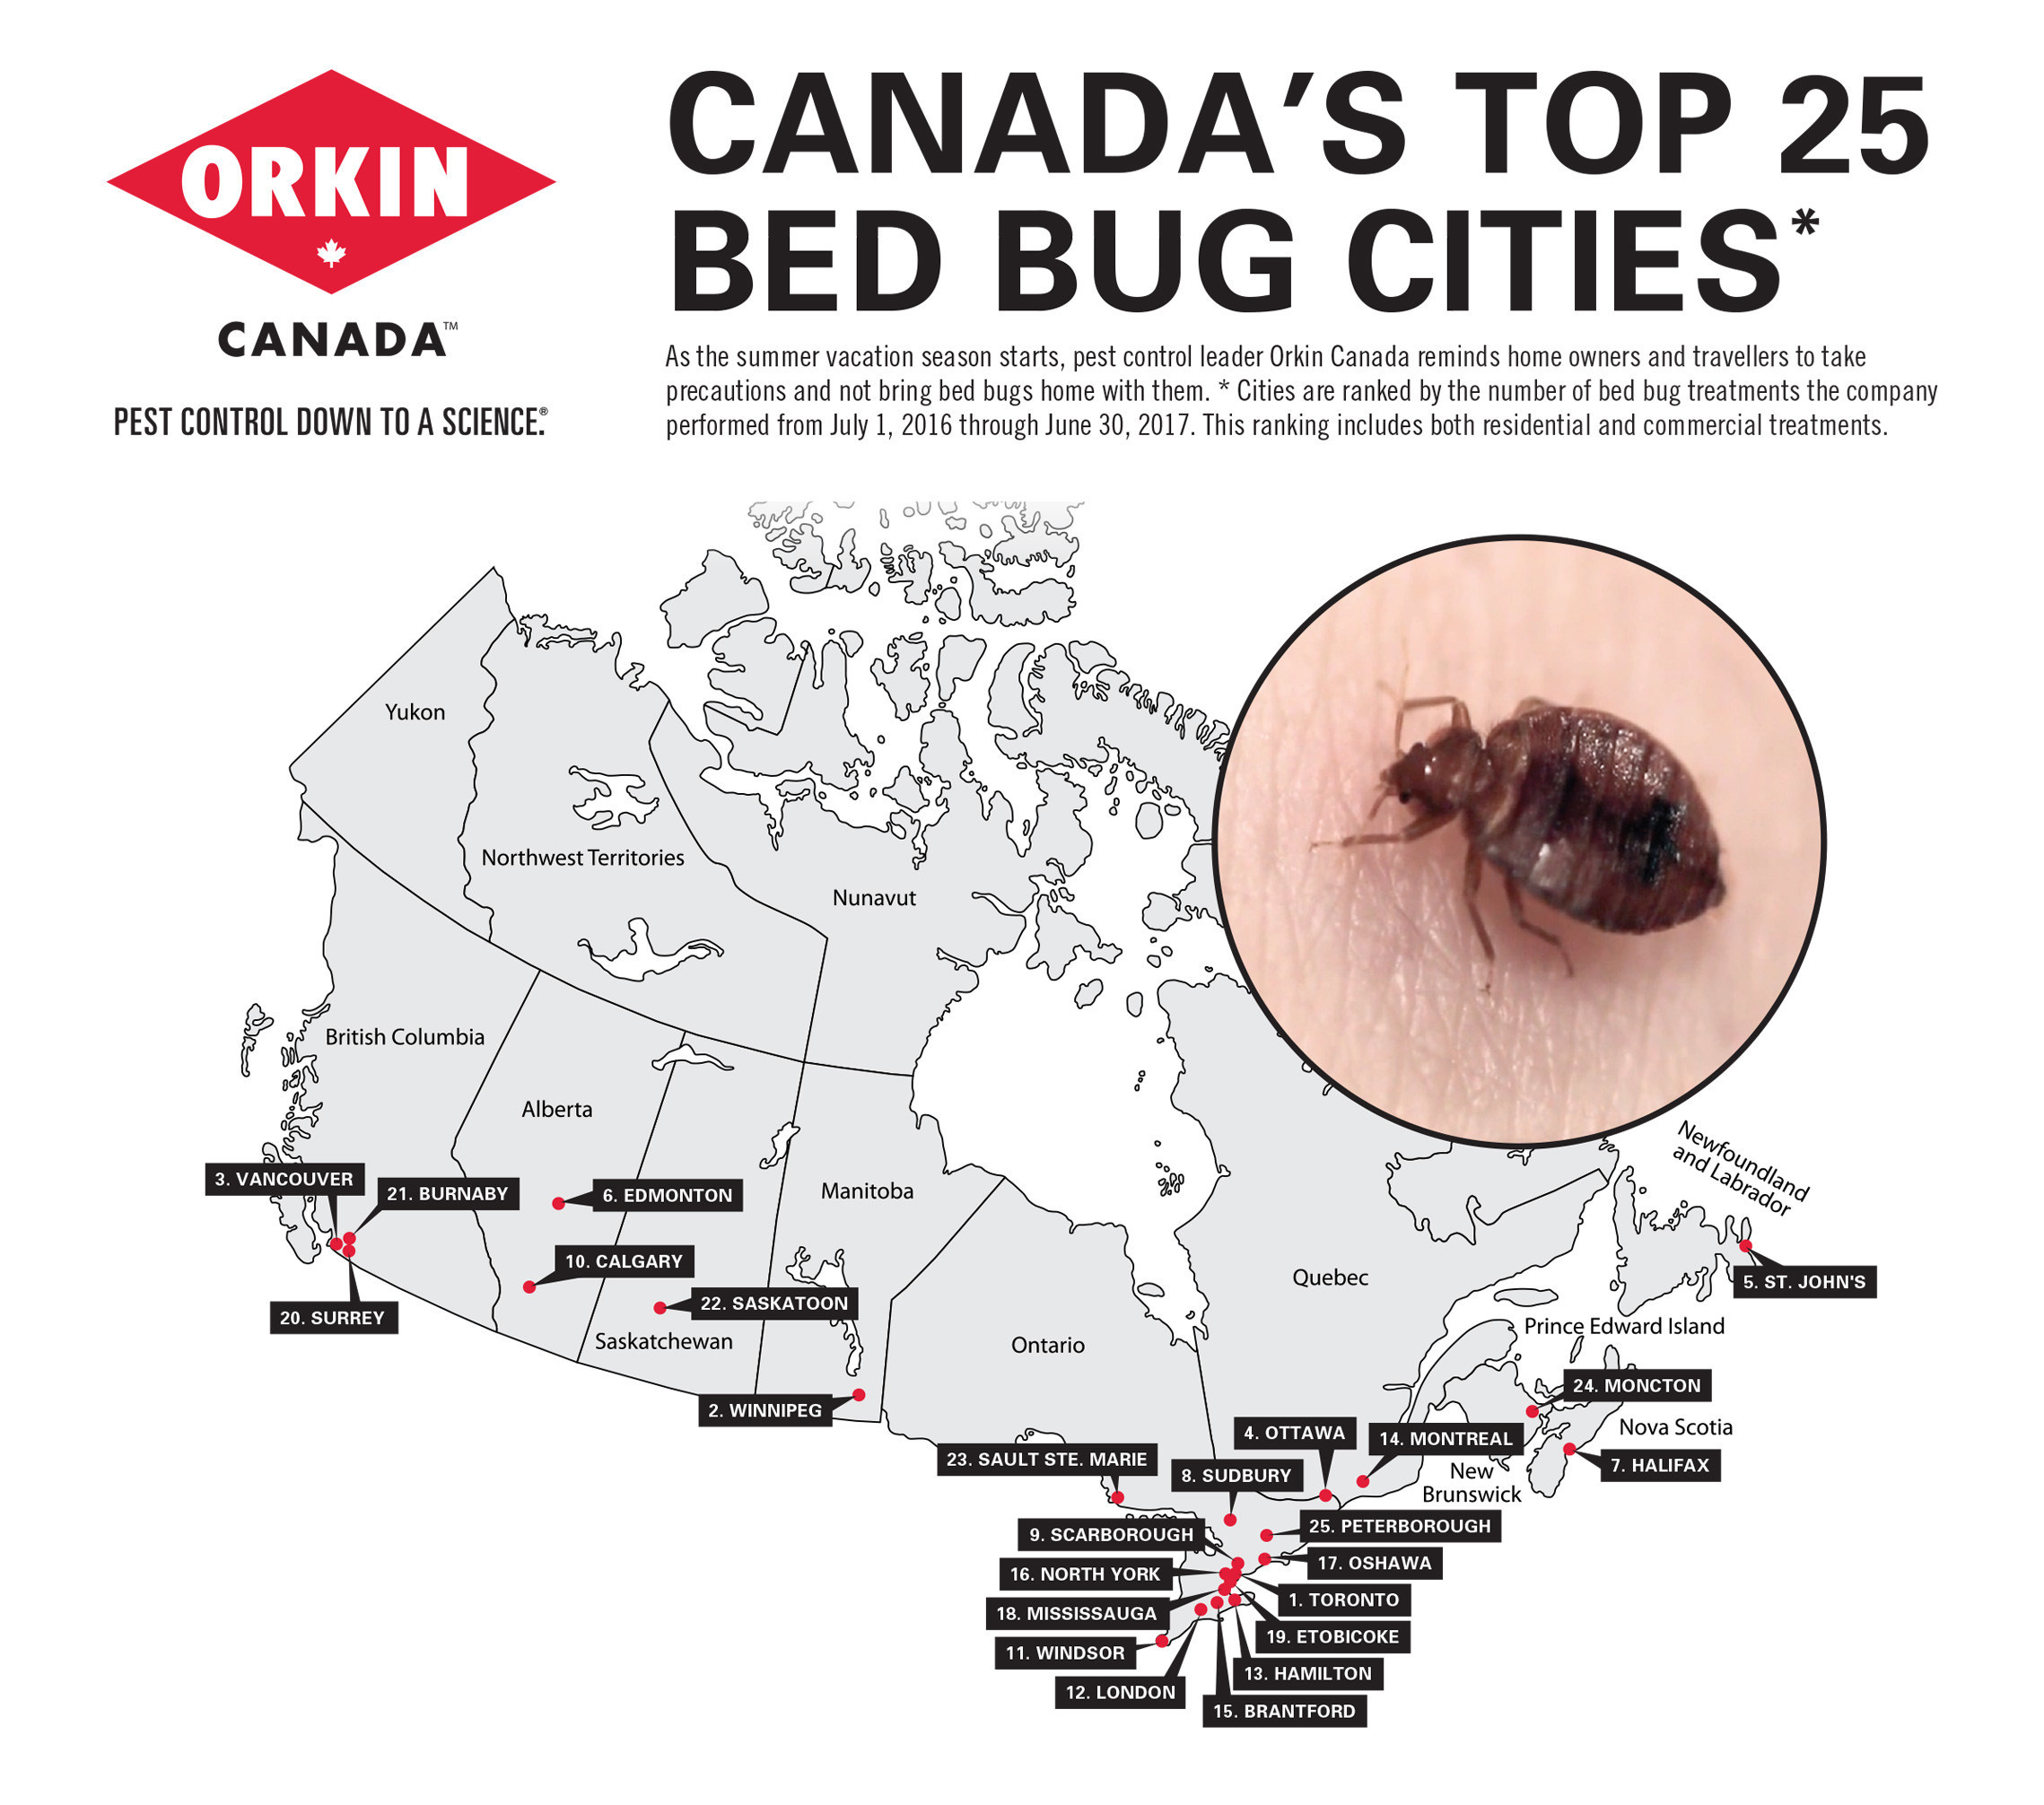 Orkin Canada-Toronto is the Capital of Canada for Bed Bugs